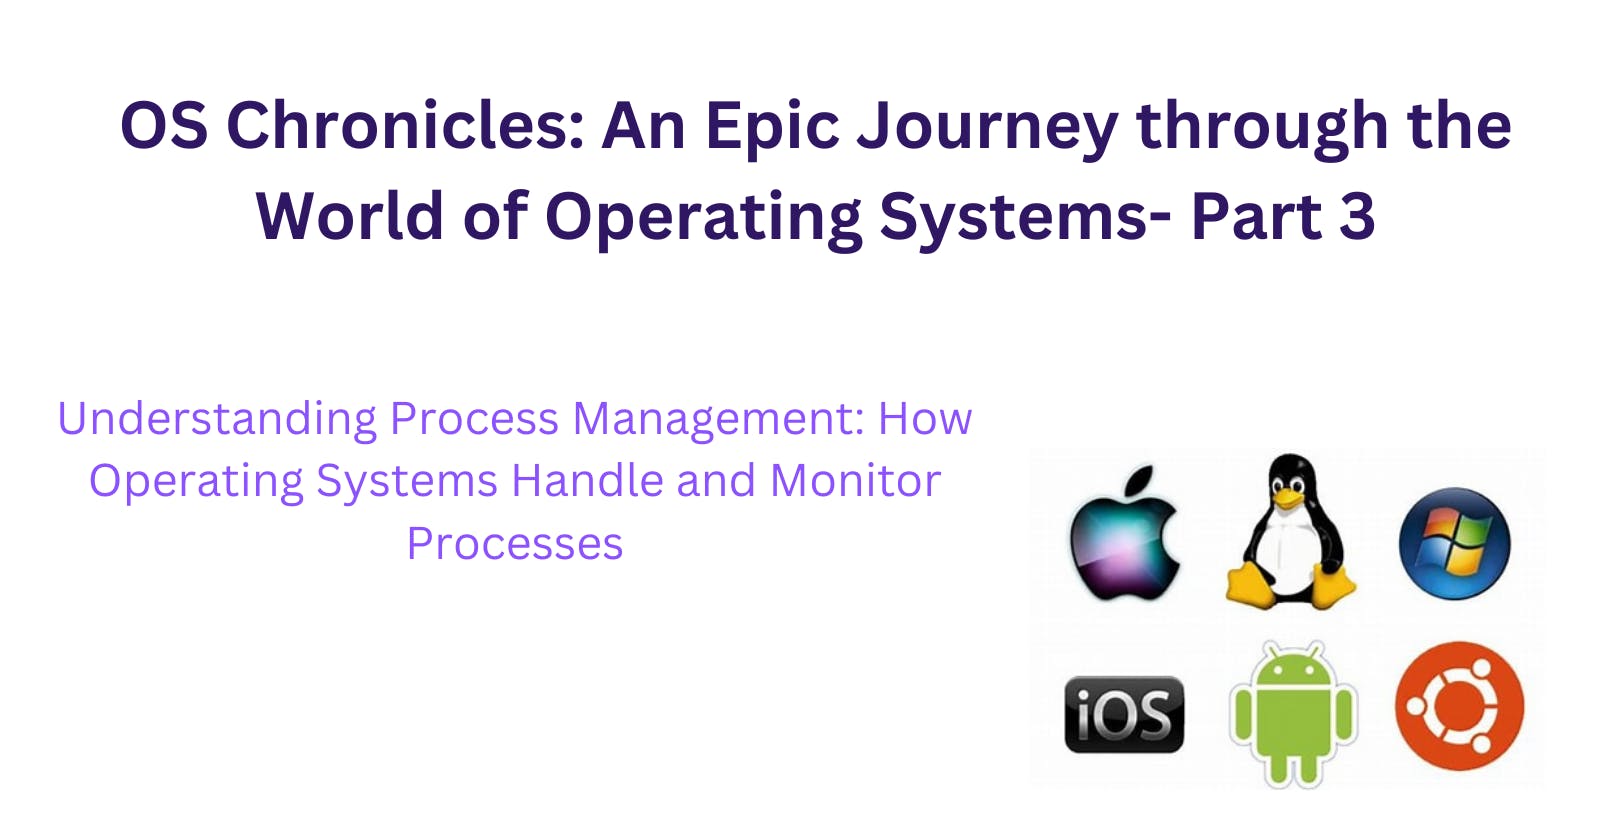 Understanding Process Management: How Operating Systems Handle and Monitor Processes